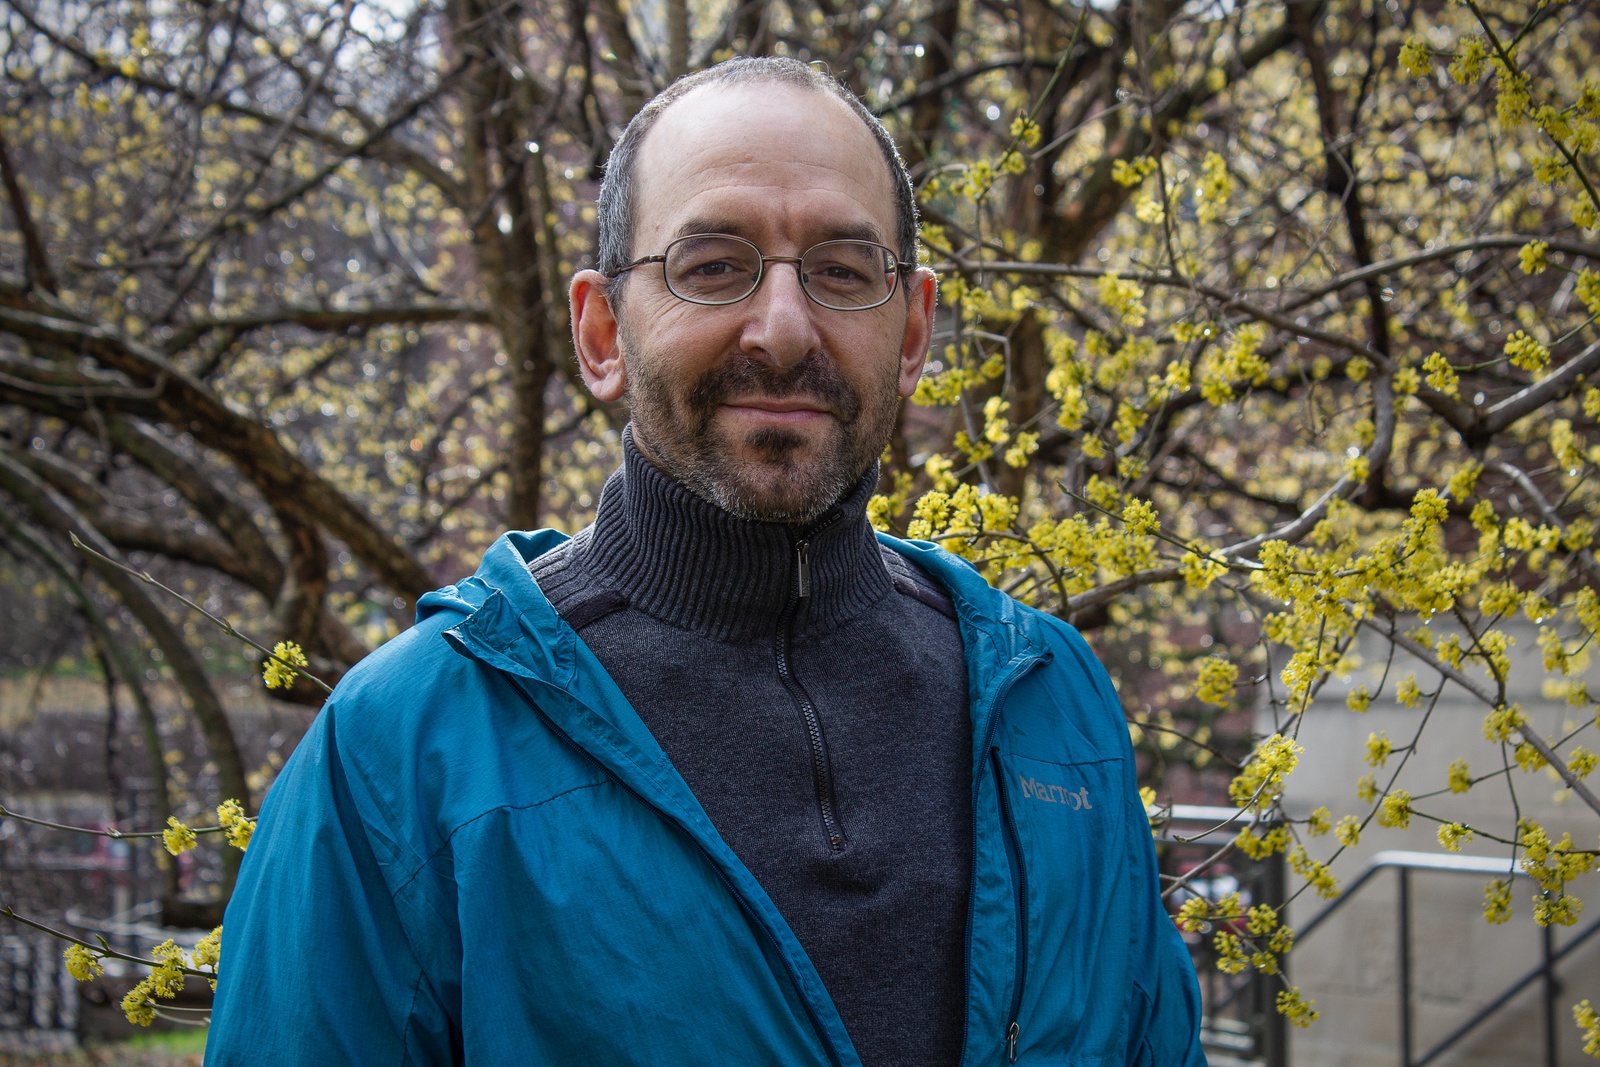 A man with dark hair and glasses stands in front of a tree with yellow blossoms. He is wearing a blue turtleneck sweater and blue raincoat.